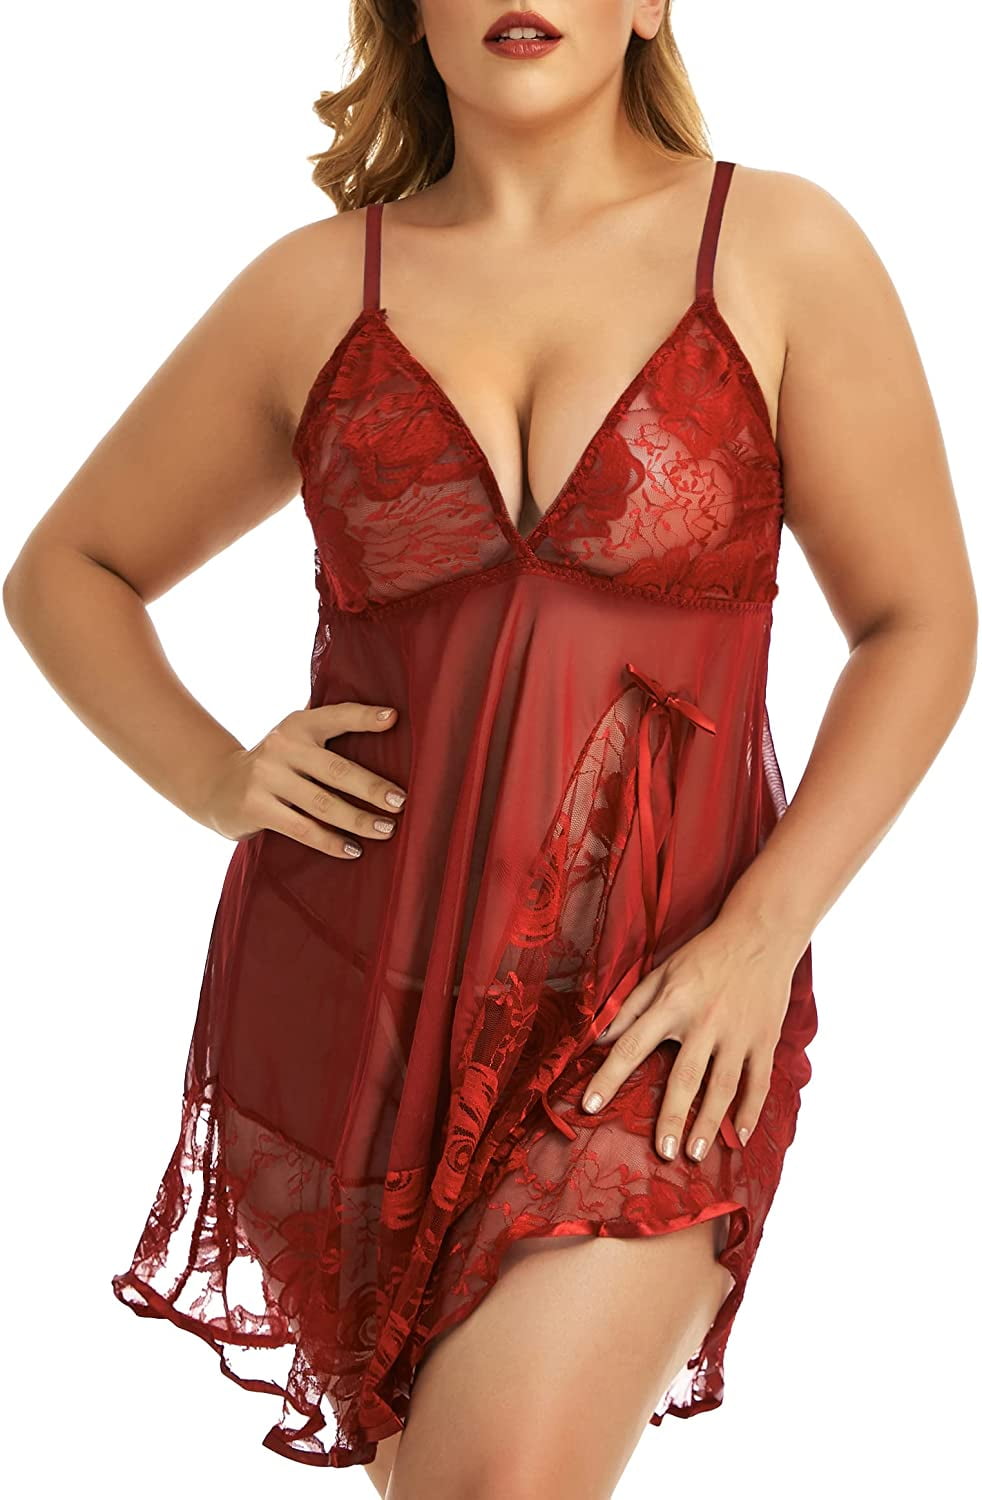 ADOREJOY Women's Lingerie Lace Babydoll Plus Size Sleepwear (red,S) at   Women's Clothing store